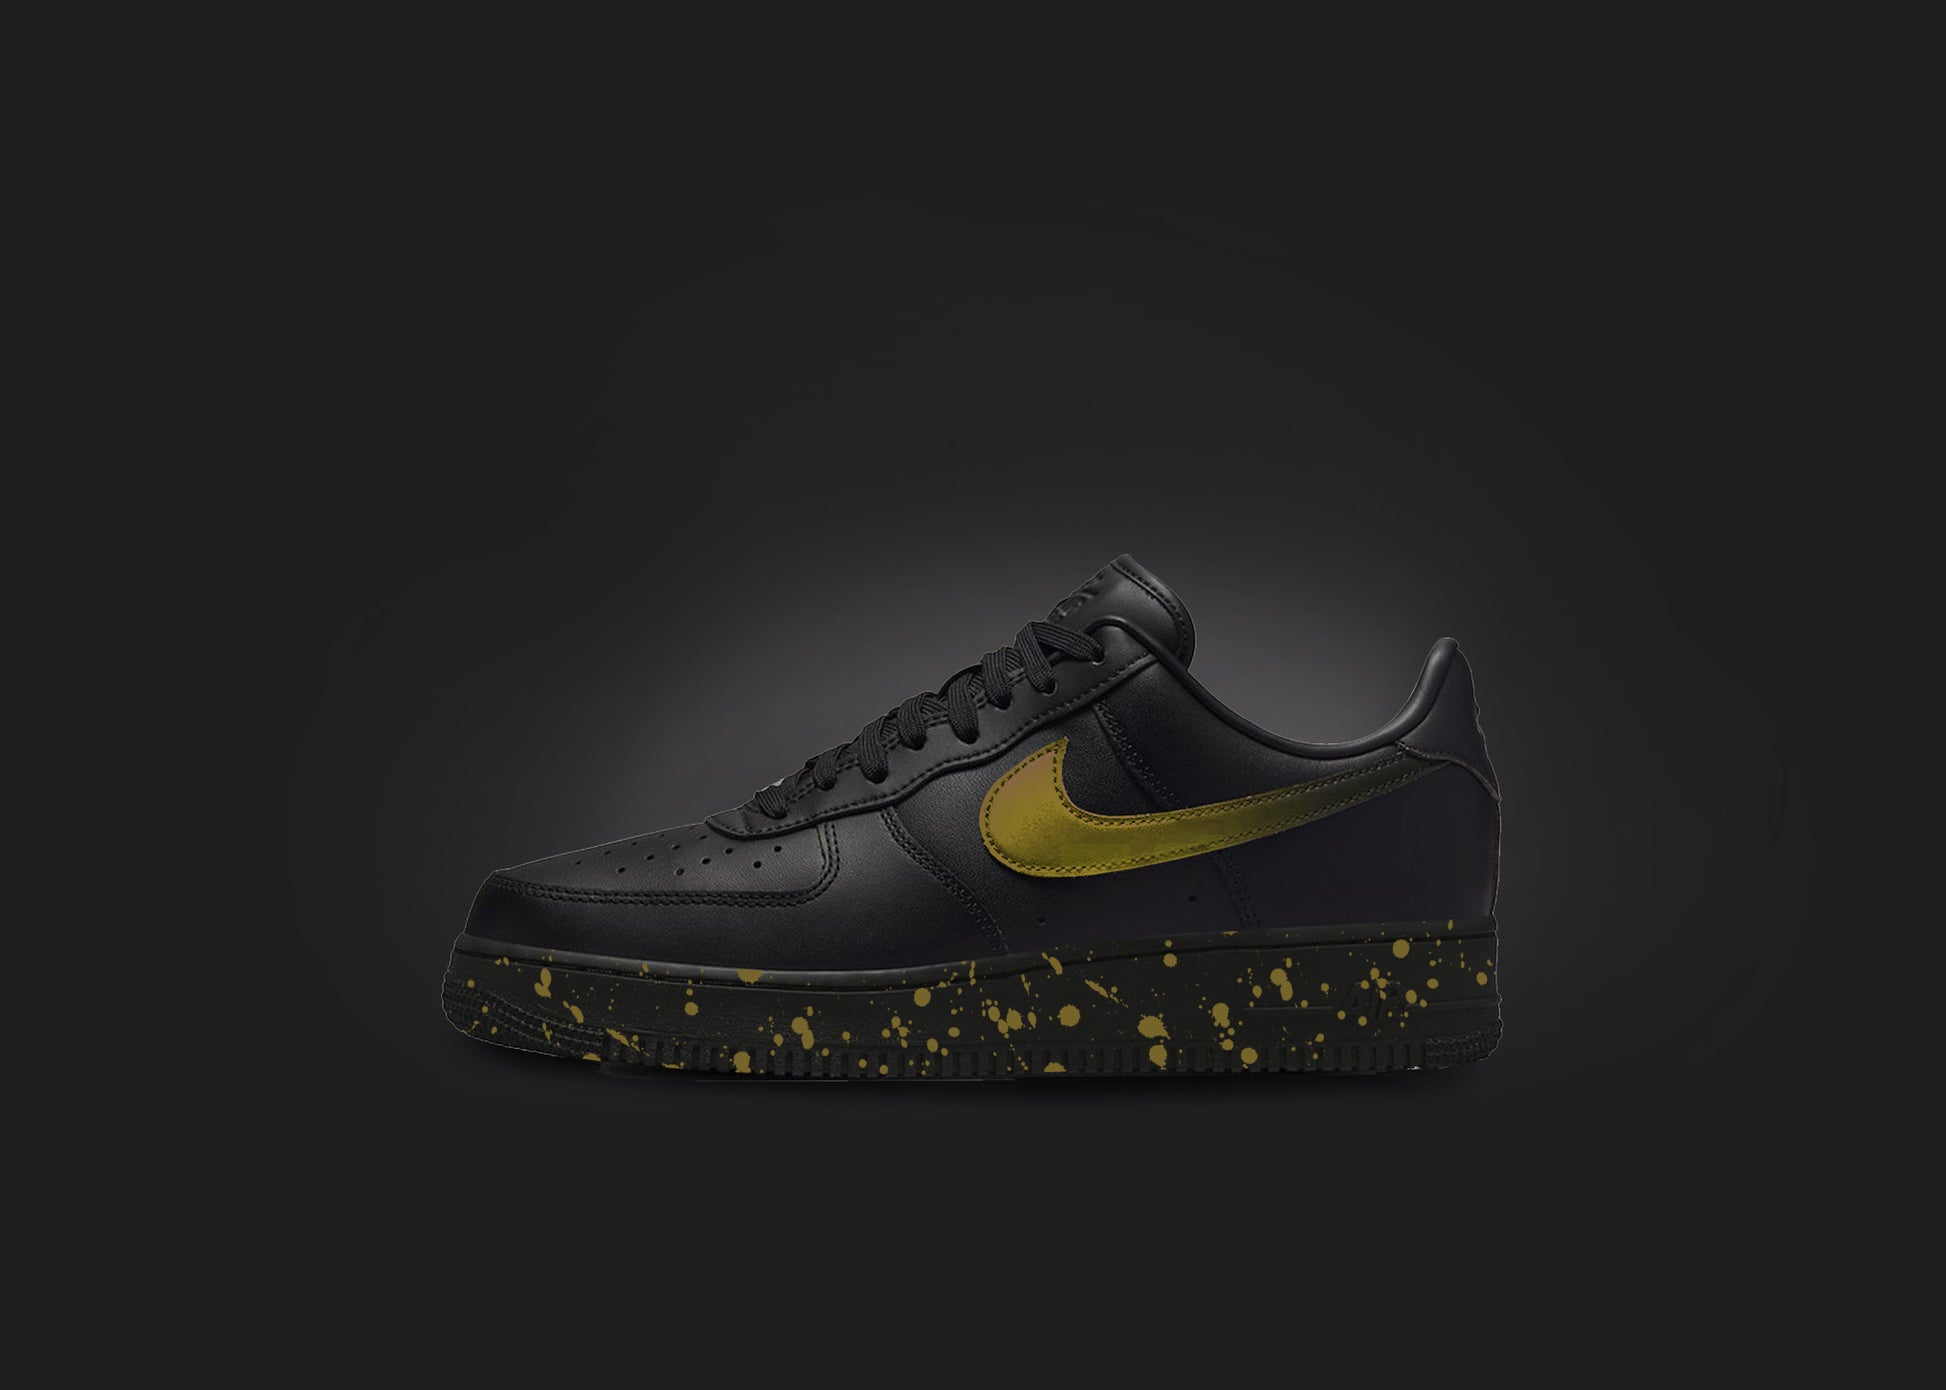 The image is featuring a custom black Air force 1 sneaker on a blank black background. The black nike sneaker has a yellow paint splatter design on the sole and a yellow fade on the nike logo. 